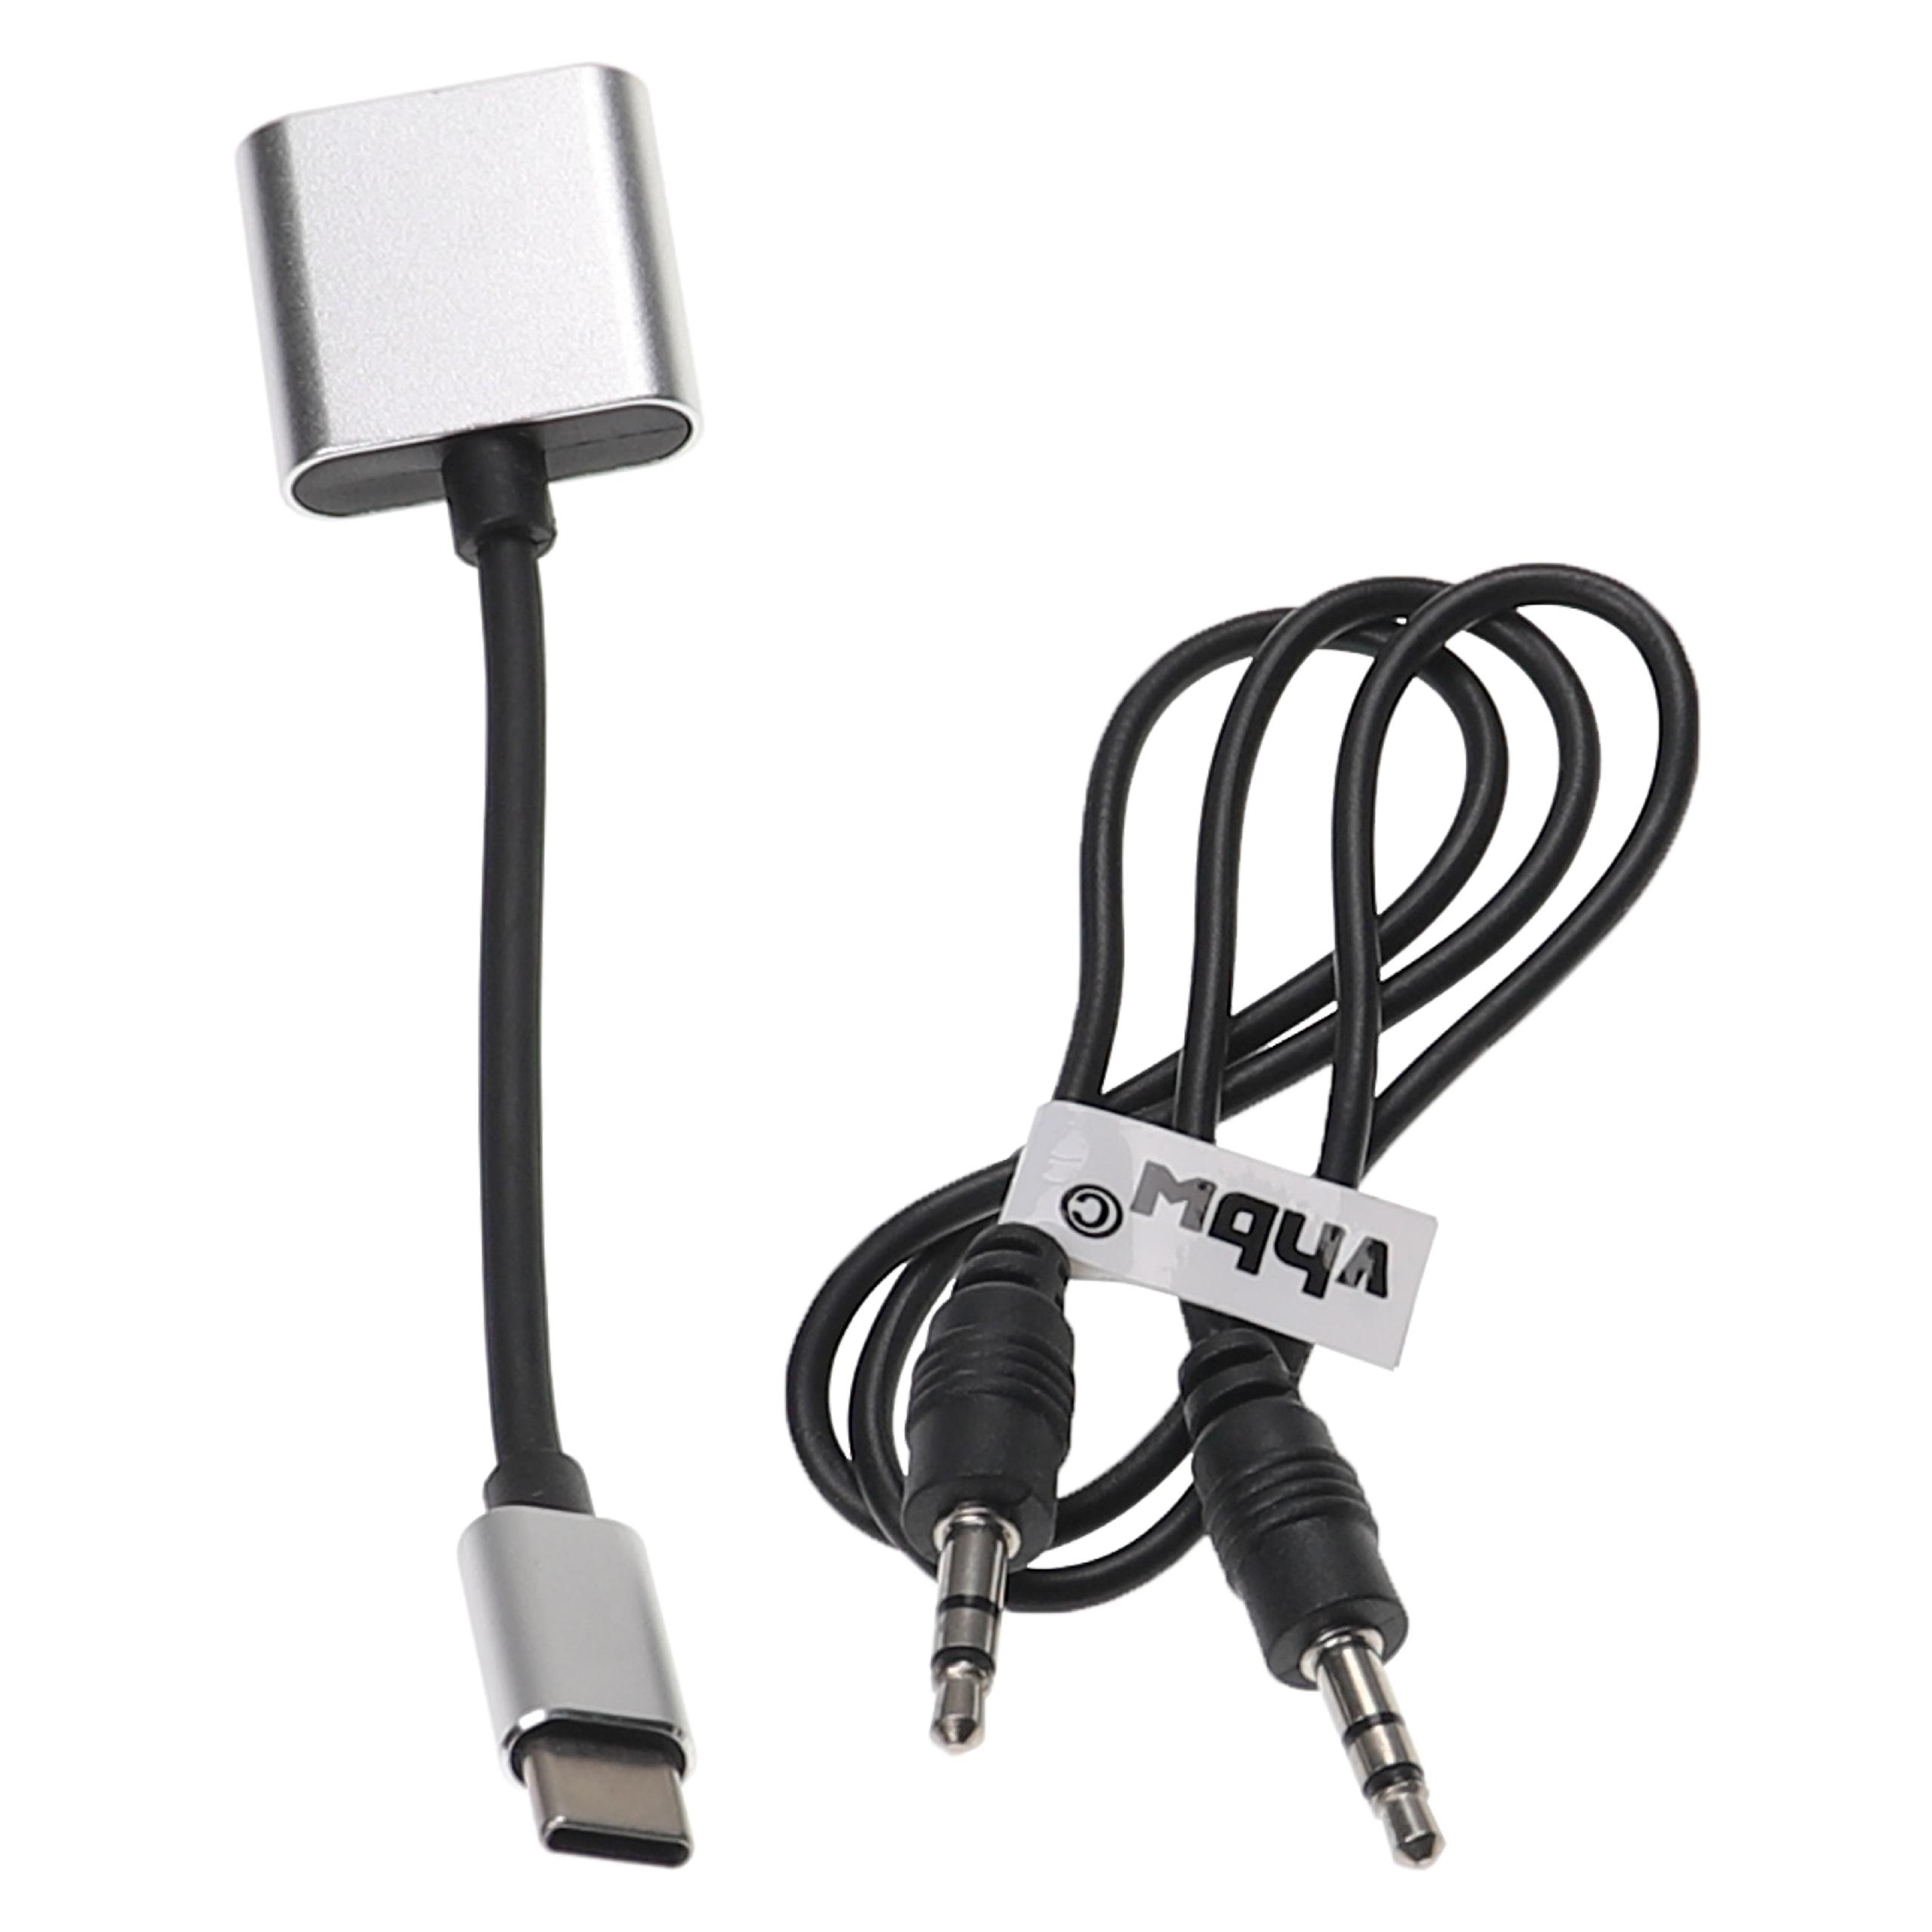 2-in-1 Adapter USB C to AUX for Huawei, Xiaomi, Motorola Smartphone etc. - Incl. Jack Cable